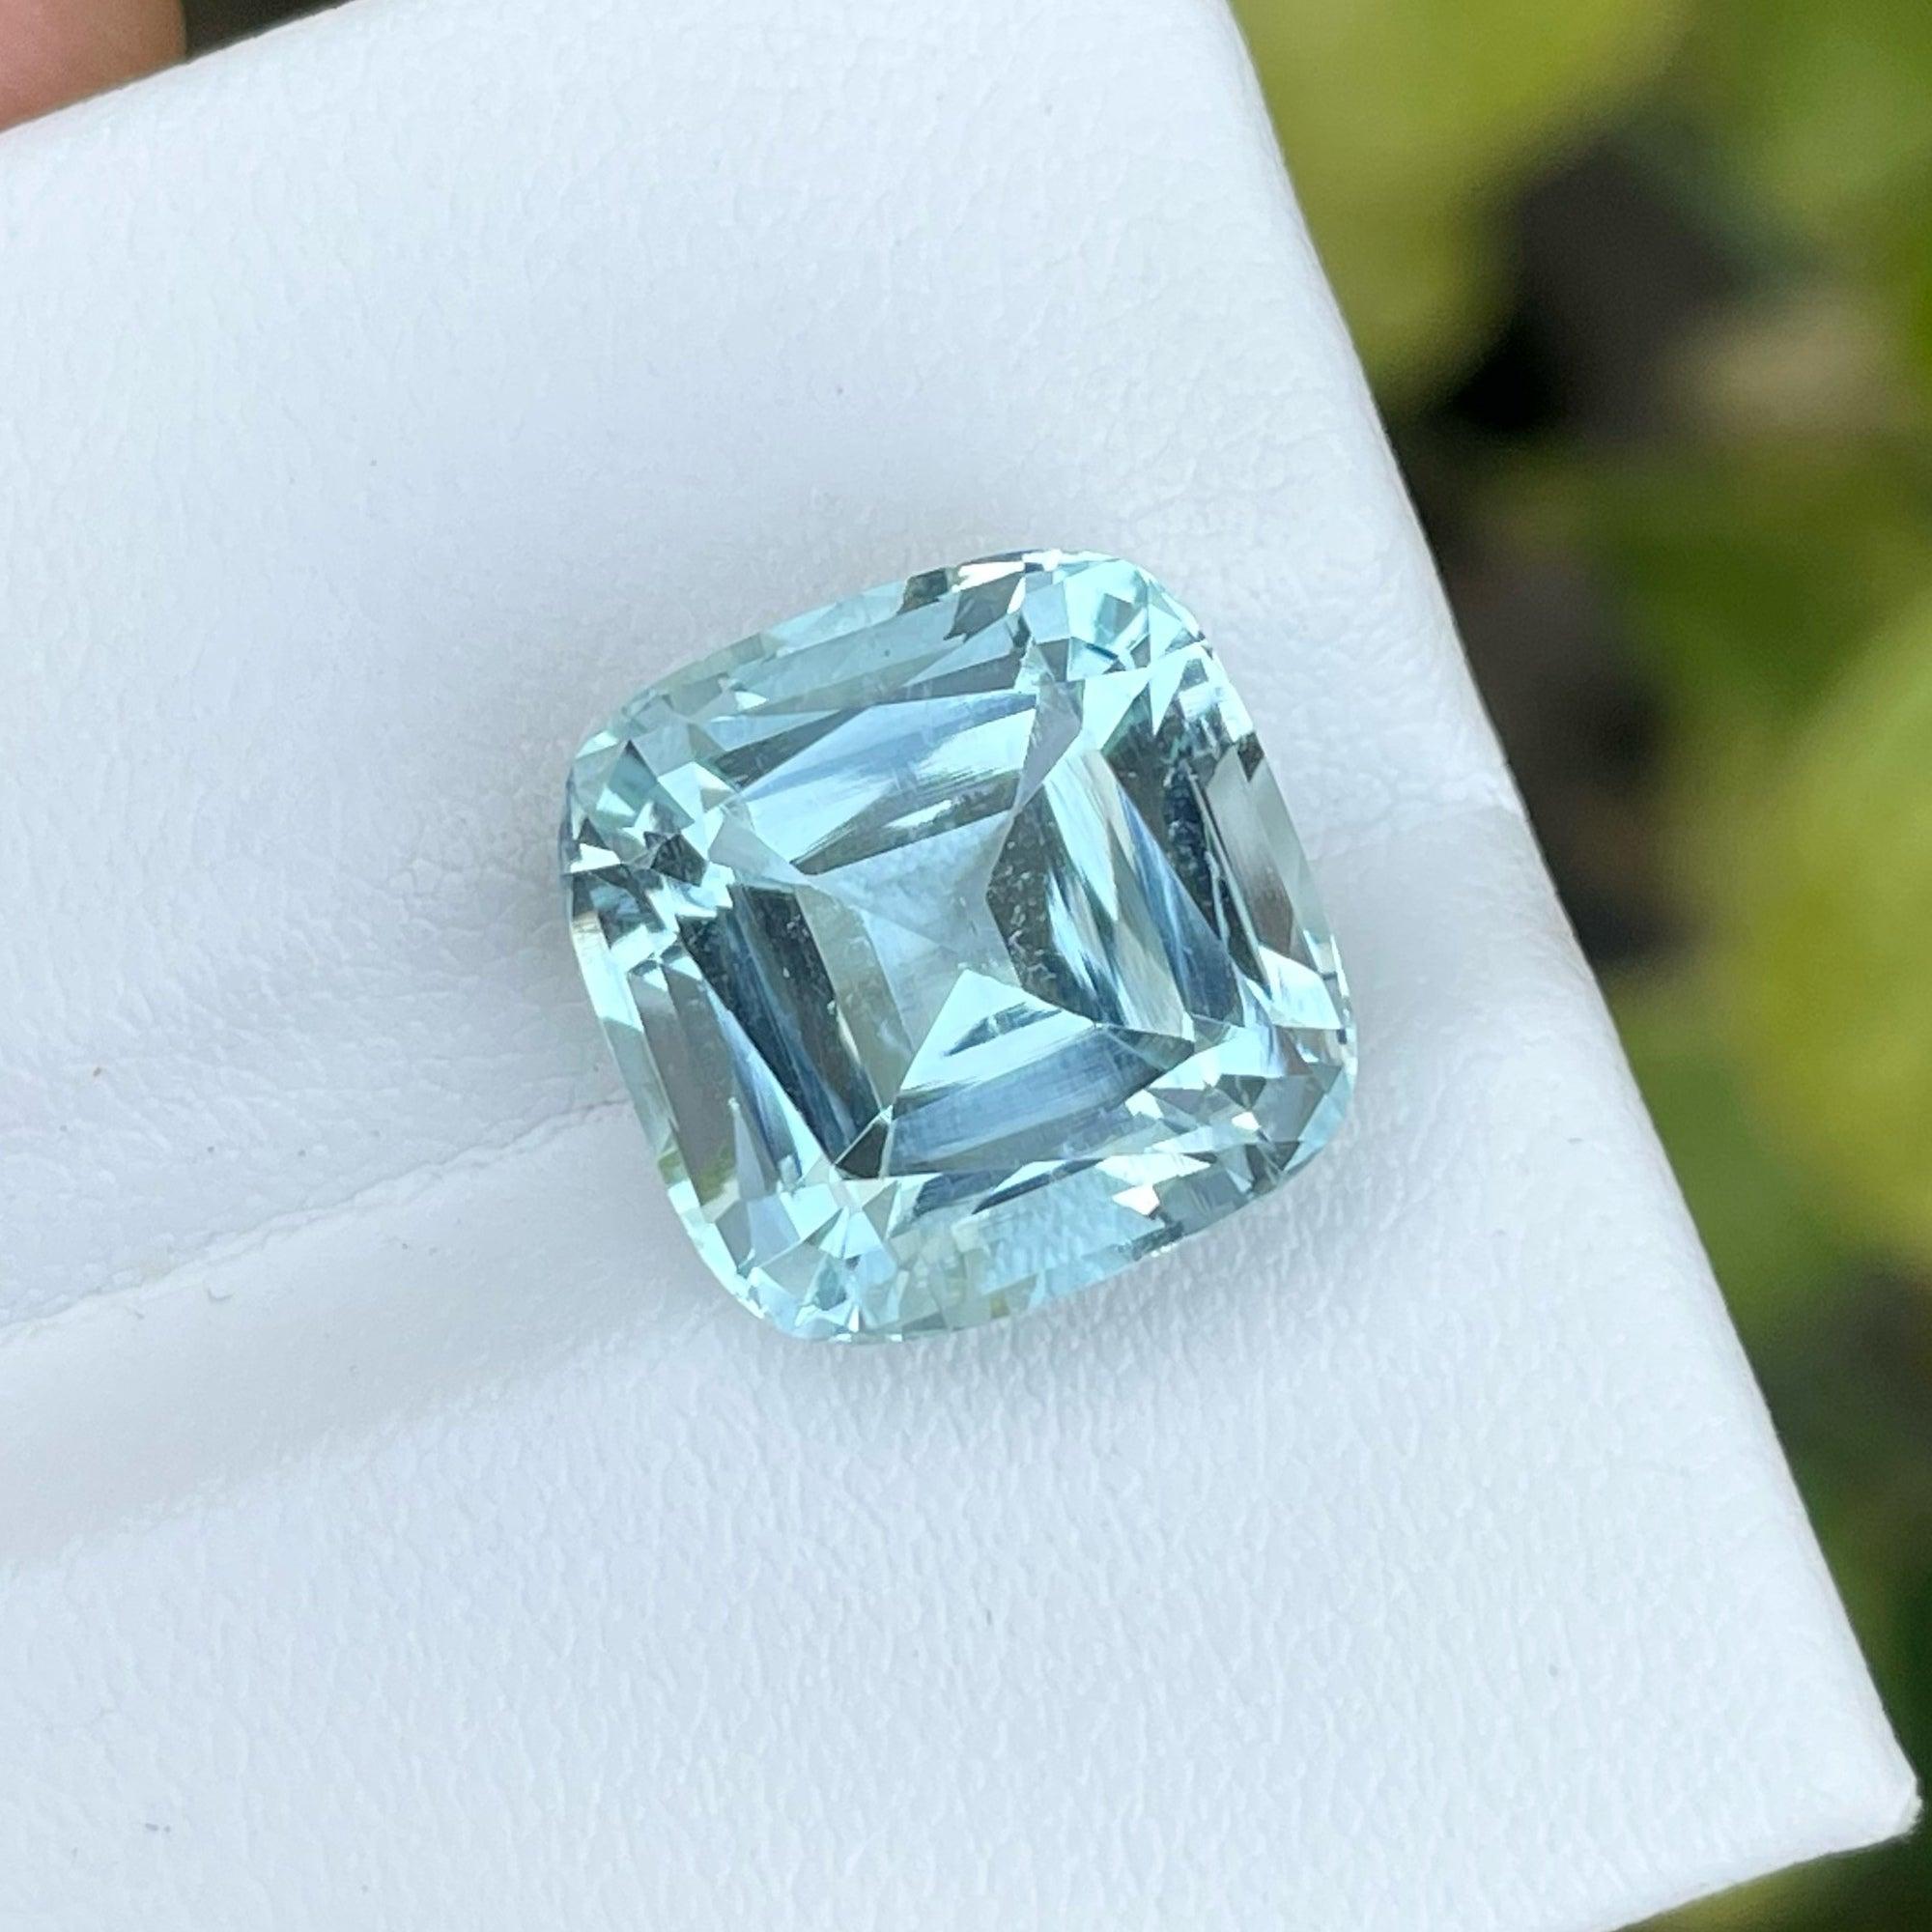 Sparkling Deep Sea Blue Aquamarine, Available for sale at wholesale price natural high quality 9.75 Carats VVS Clarity Natural Loose Aquamarine from Pakistan.

Product Information:
GEMSTONE NAME: Sparkling Deep Sea Blue Aquamarine
WEIGHT:	9.75